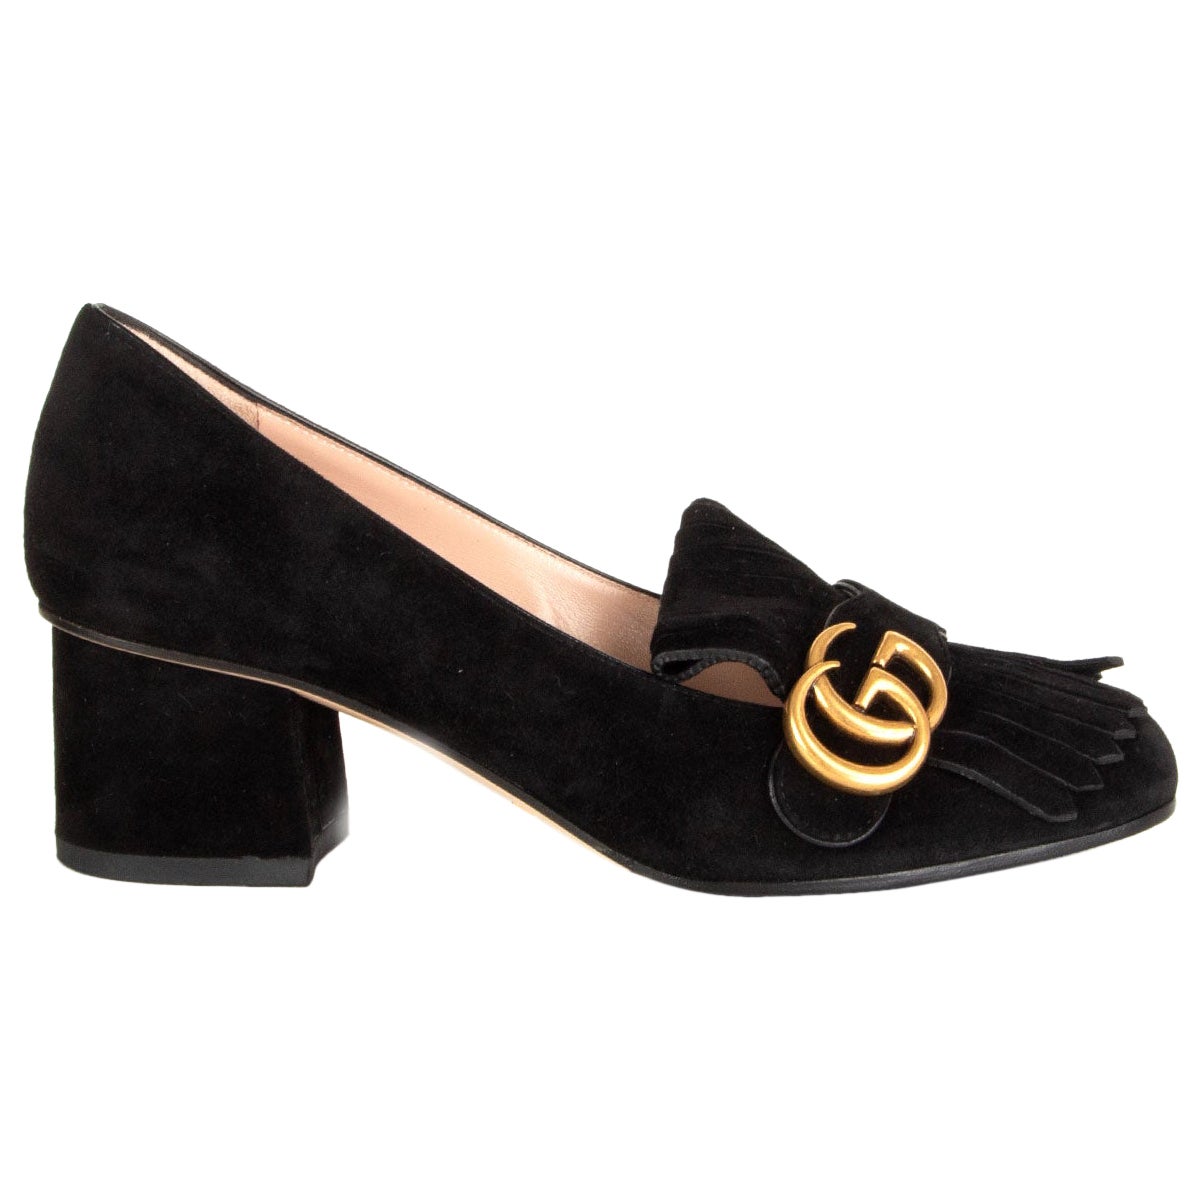 GUCCI black suede MARMONT FRINGED BLOCK HEEL Pumps Shoes 38